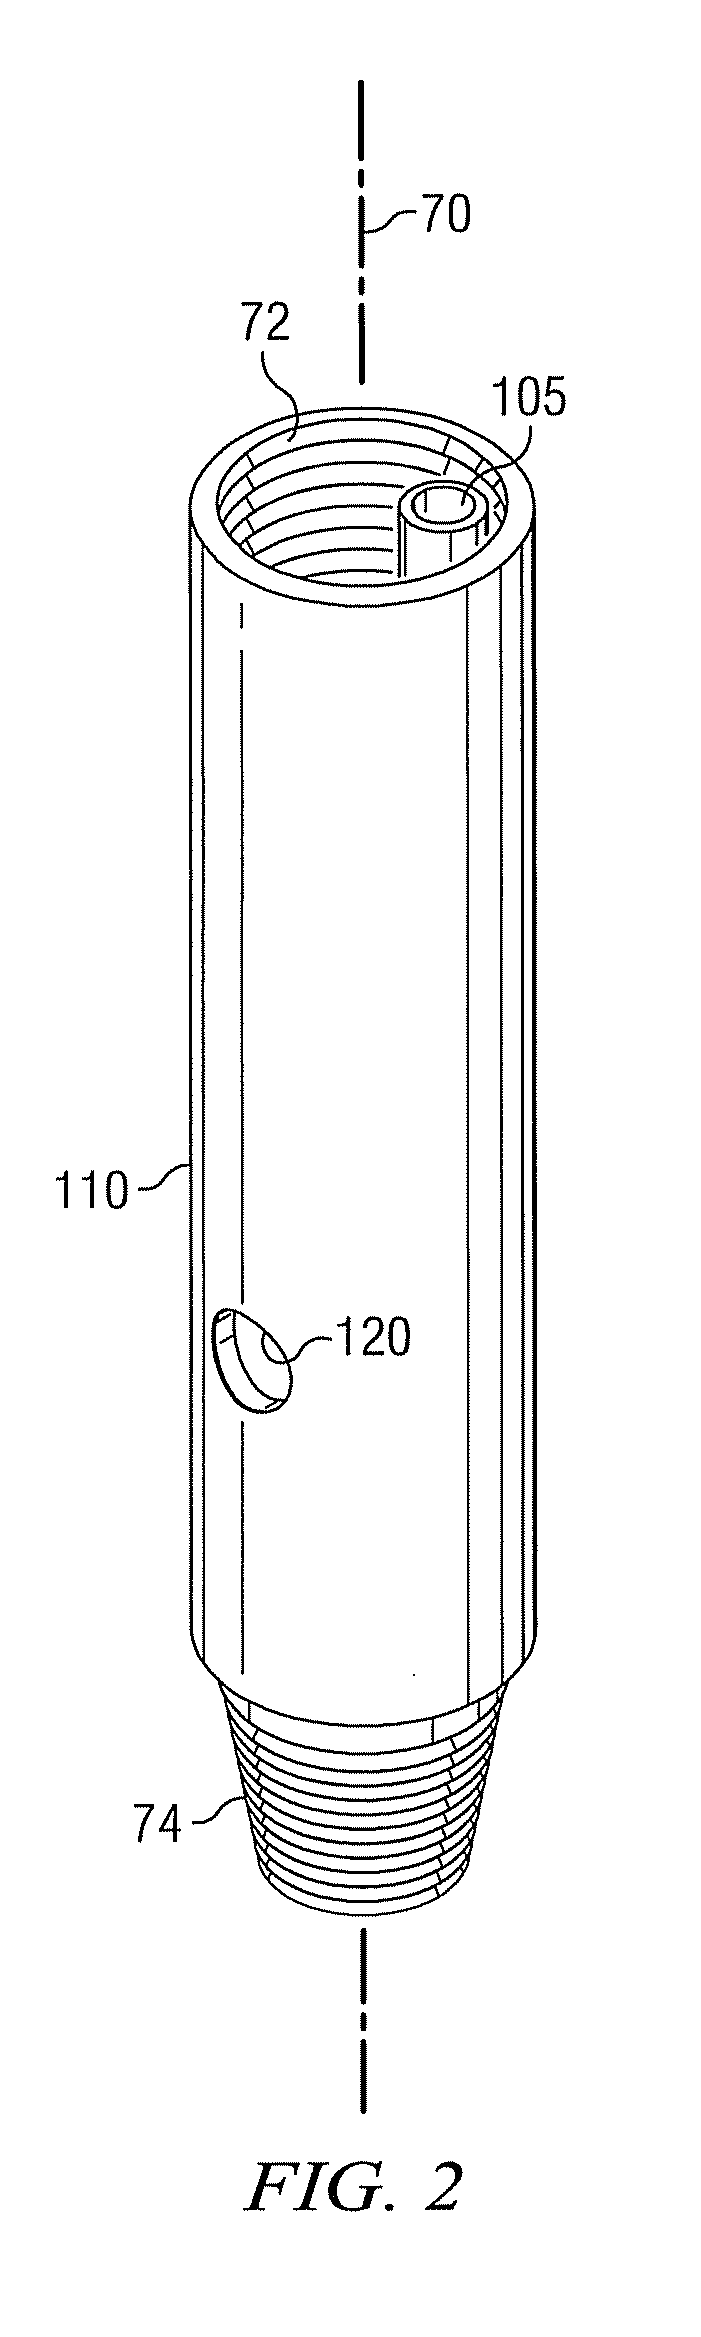 Caliper Logging Using Circumferentially Spaced and/or Angled Transducer Elements